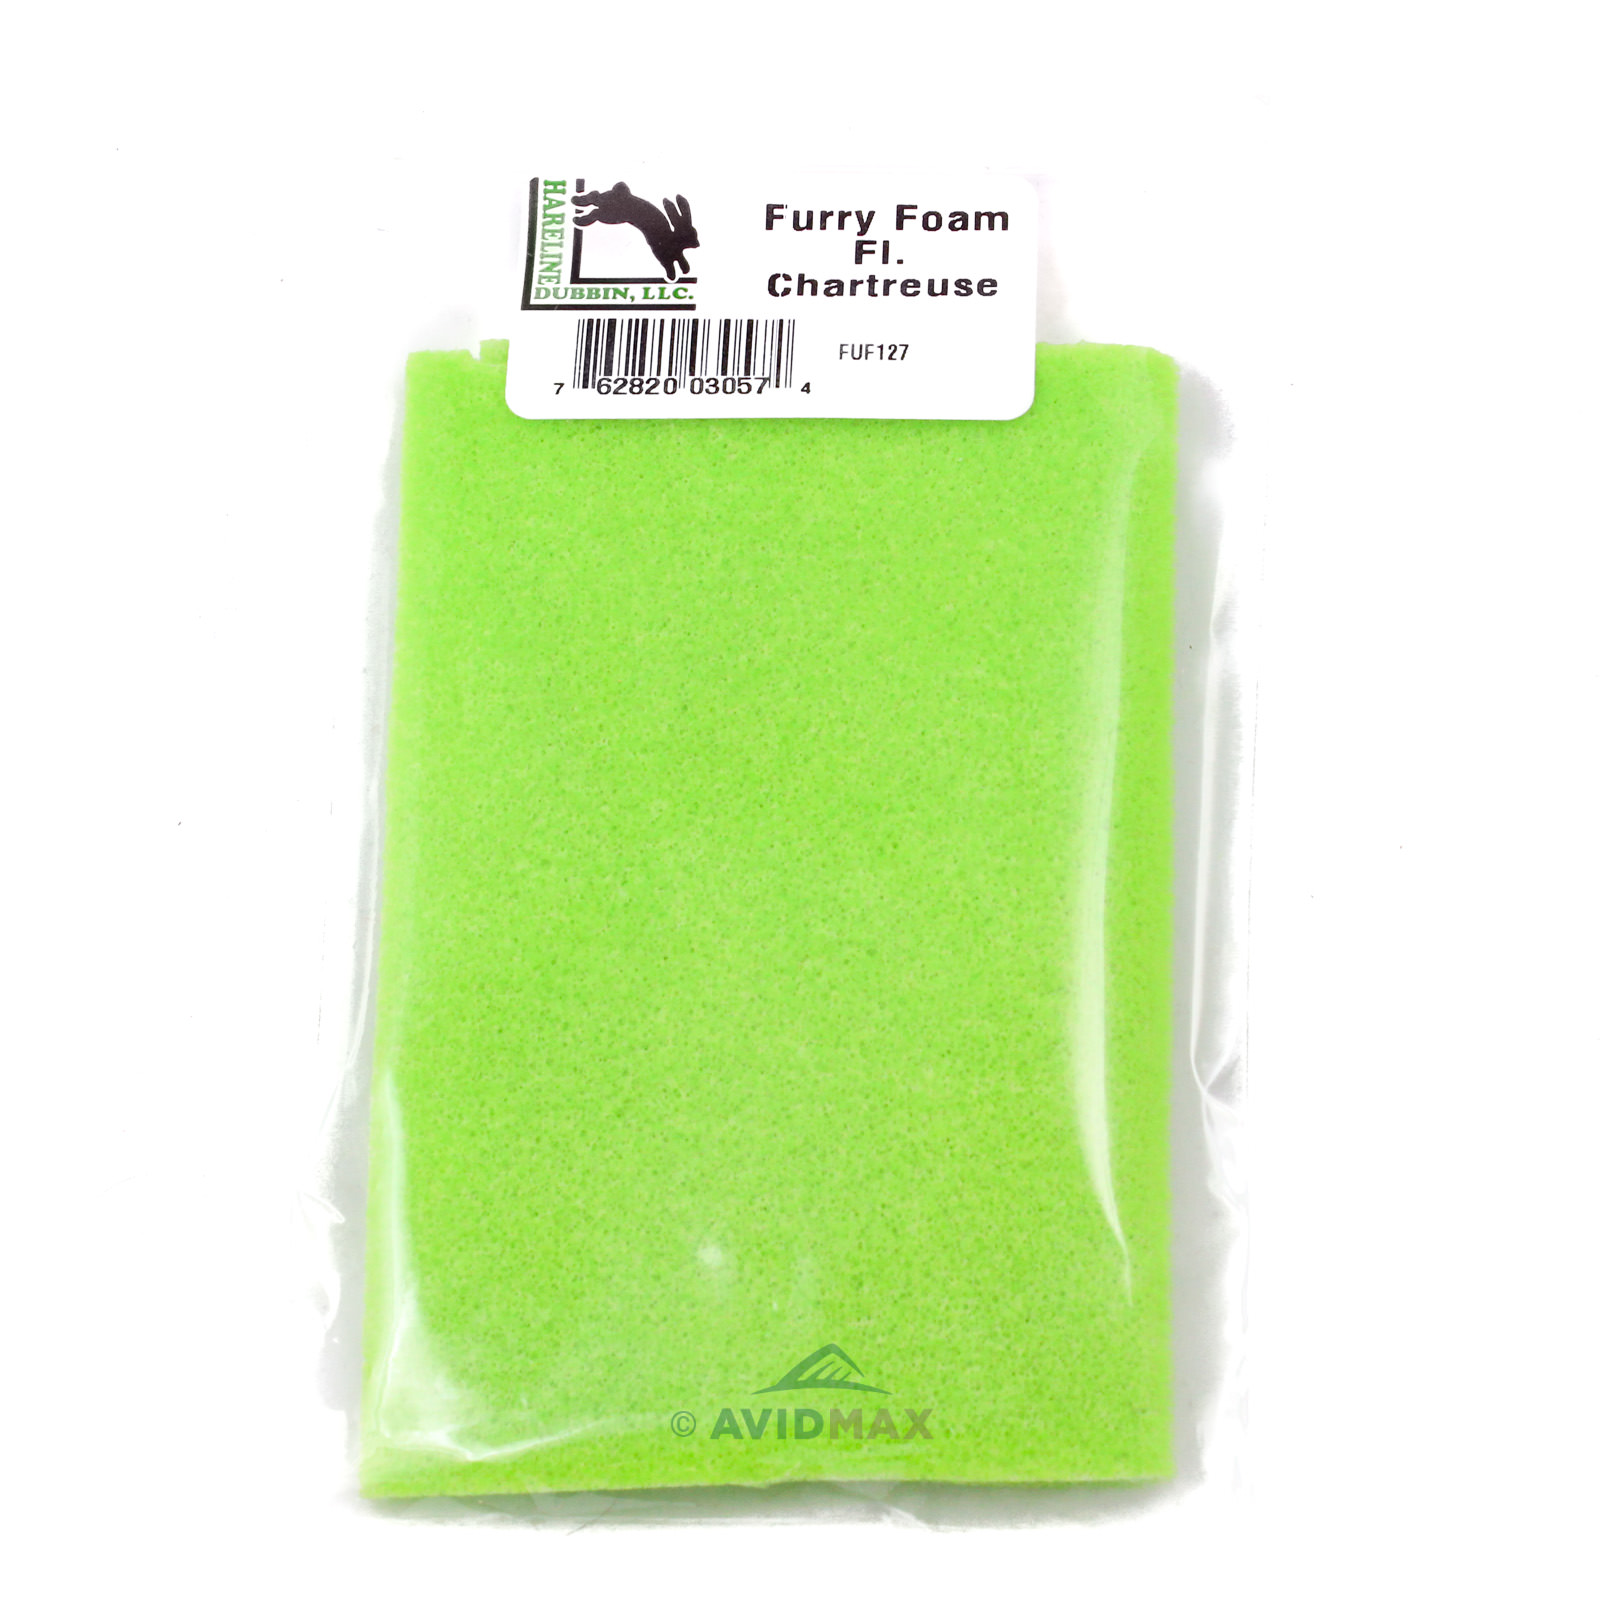 Hareline Furry Foam: Synthetic Fly Tying Supplies & Materials